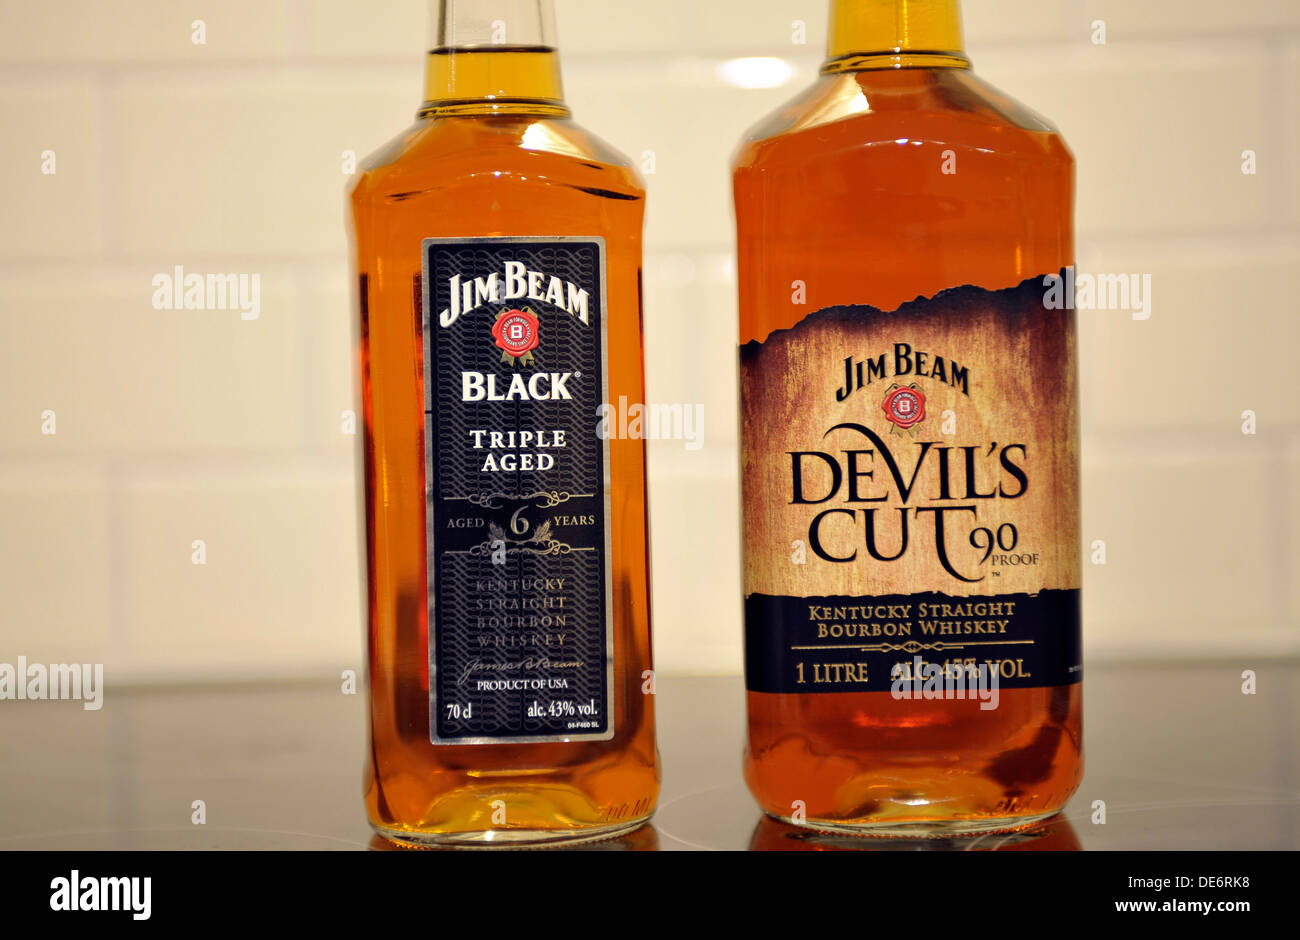 Alamy photography - hi-res images Jim black beam stock and